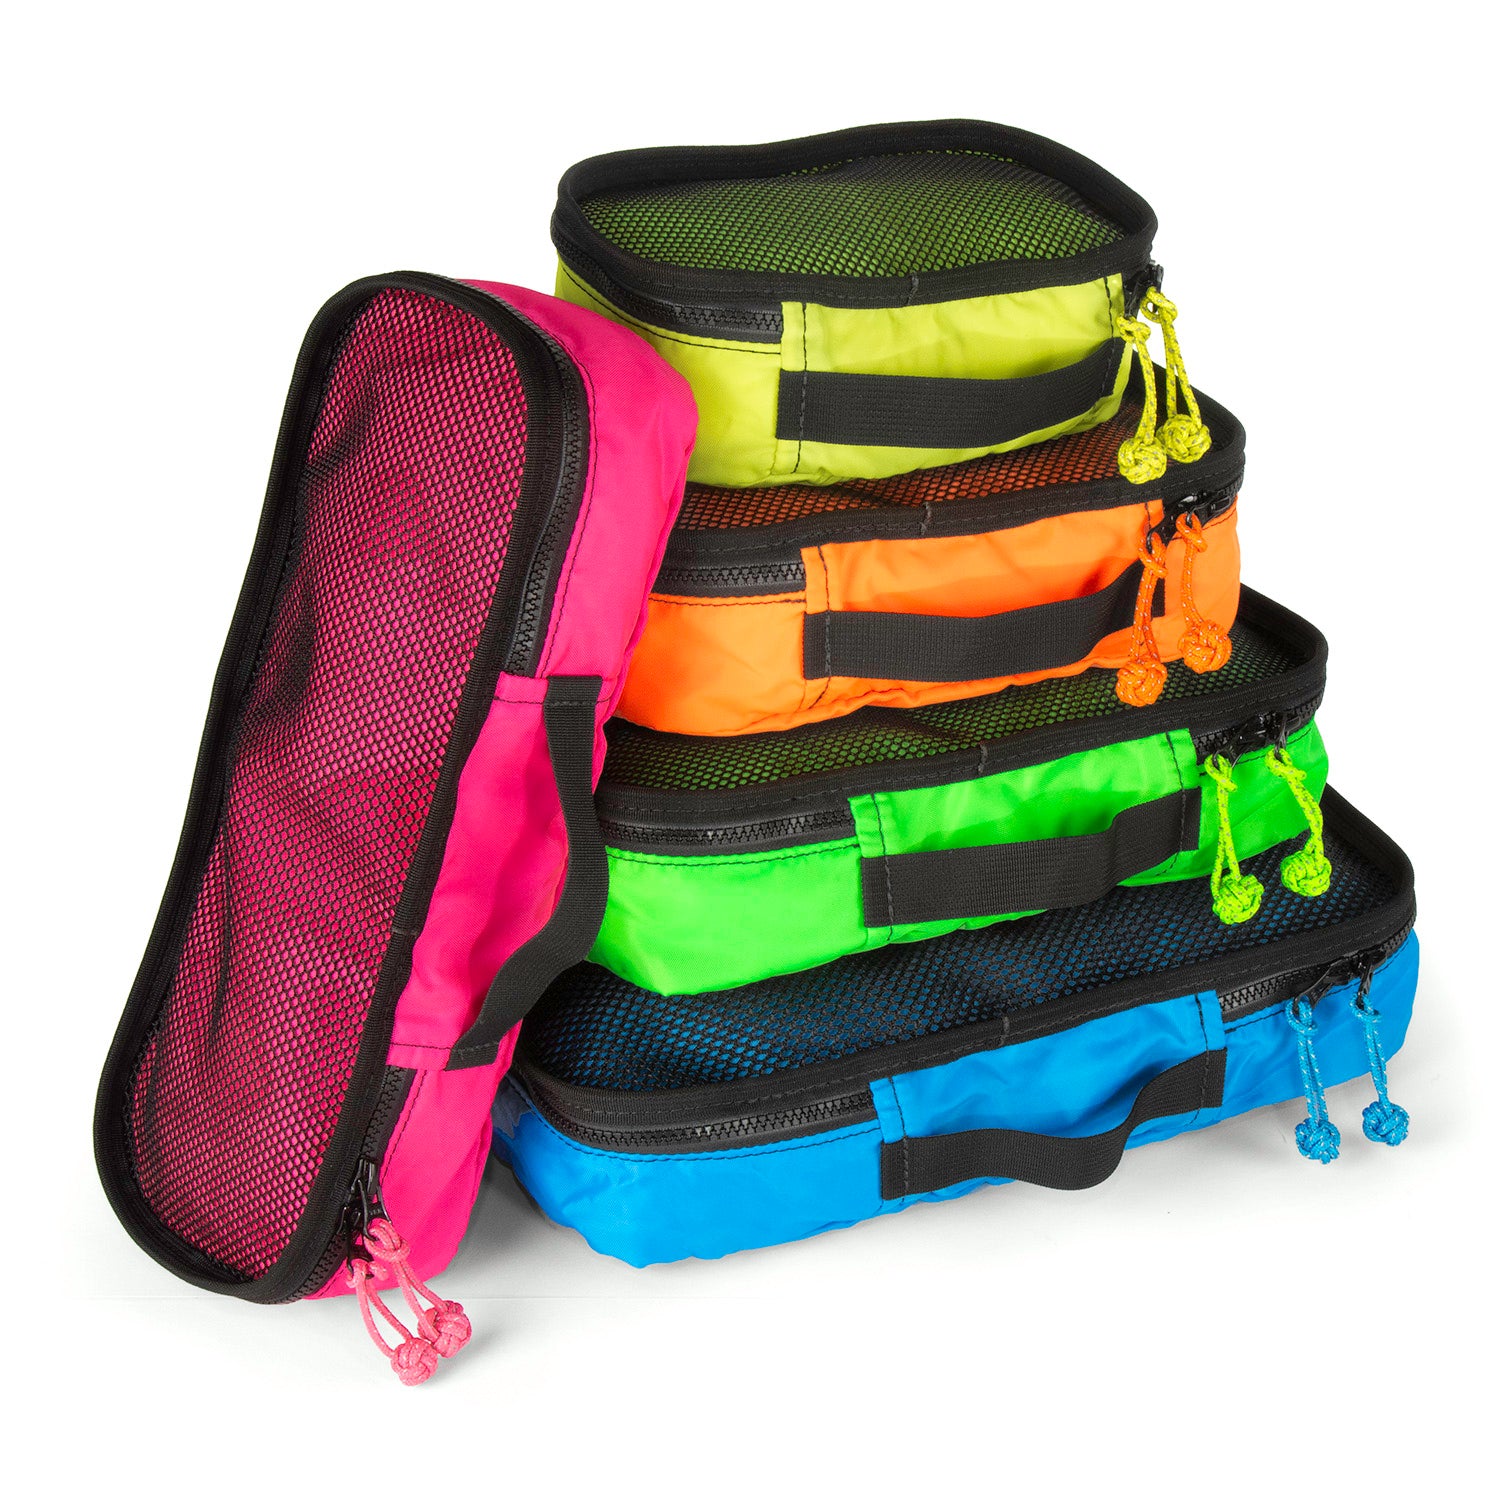 Full set of Red Oxx packing cubes in colors. 